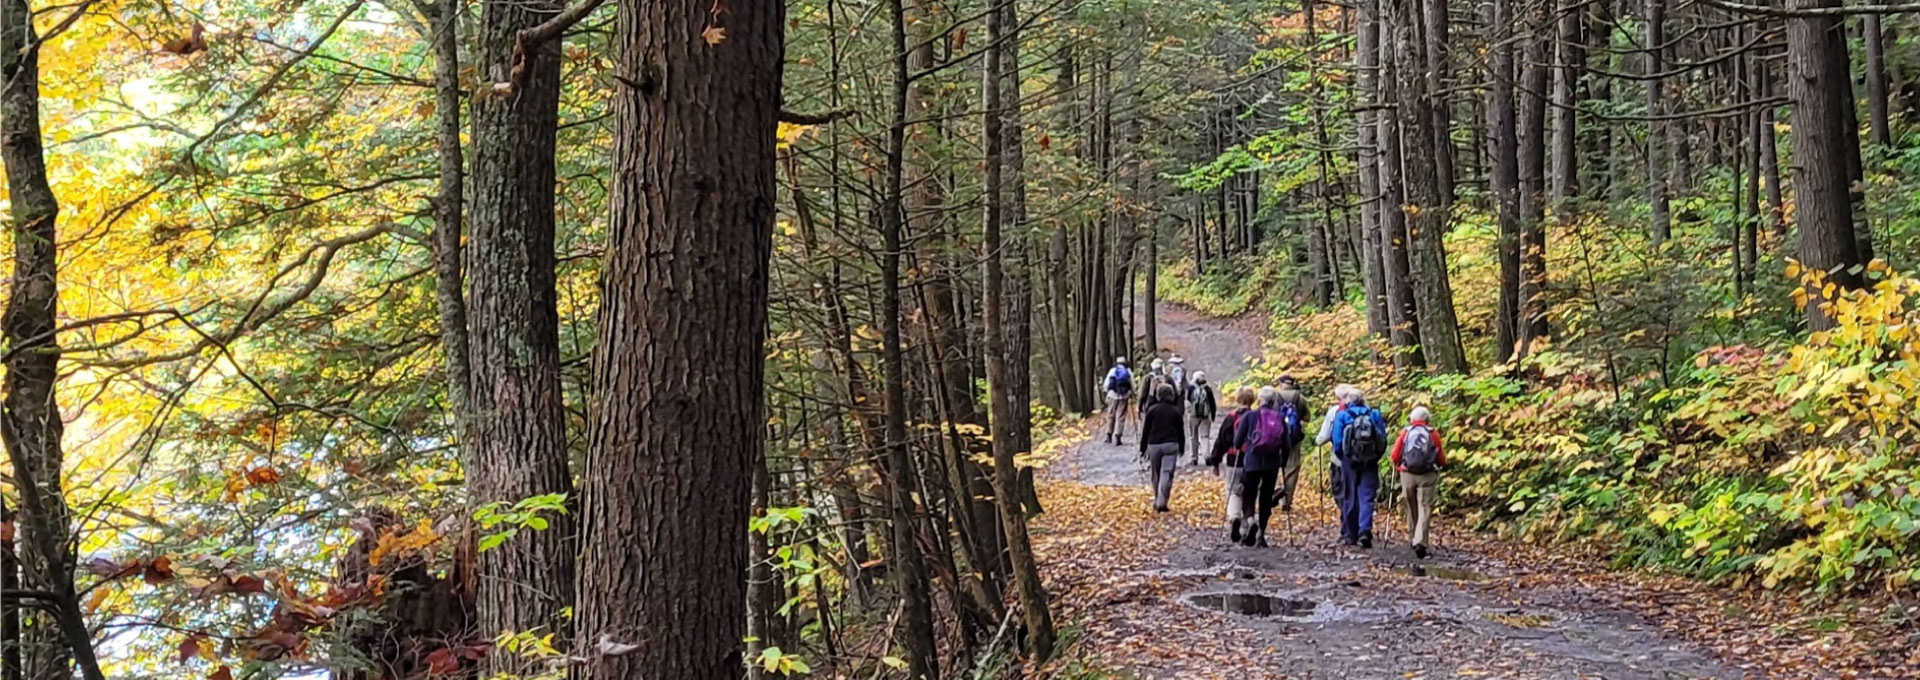 Hikers walk along Chesterfield Gorge